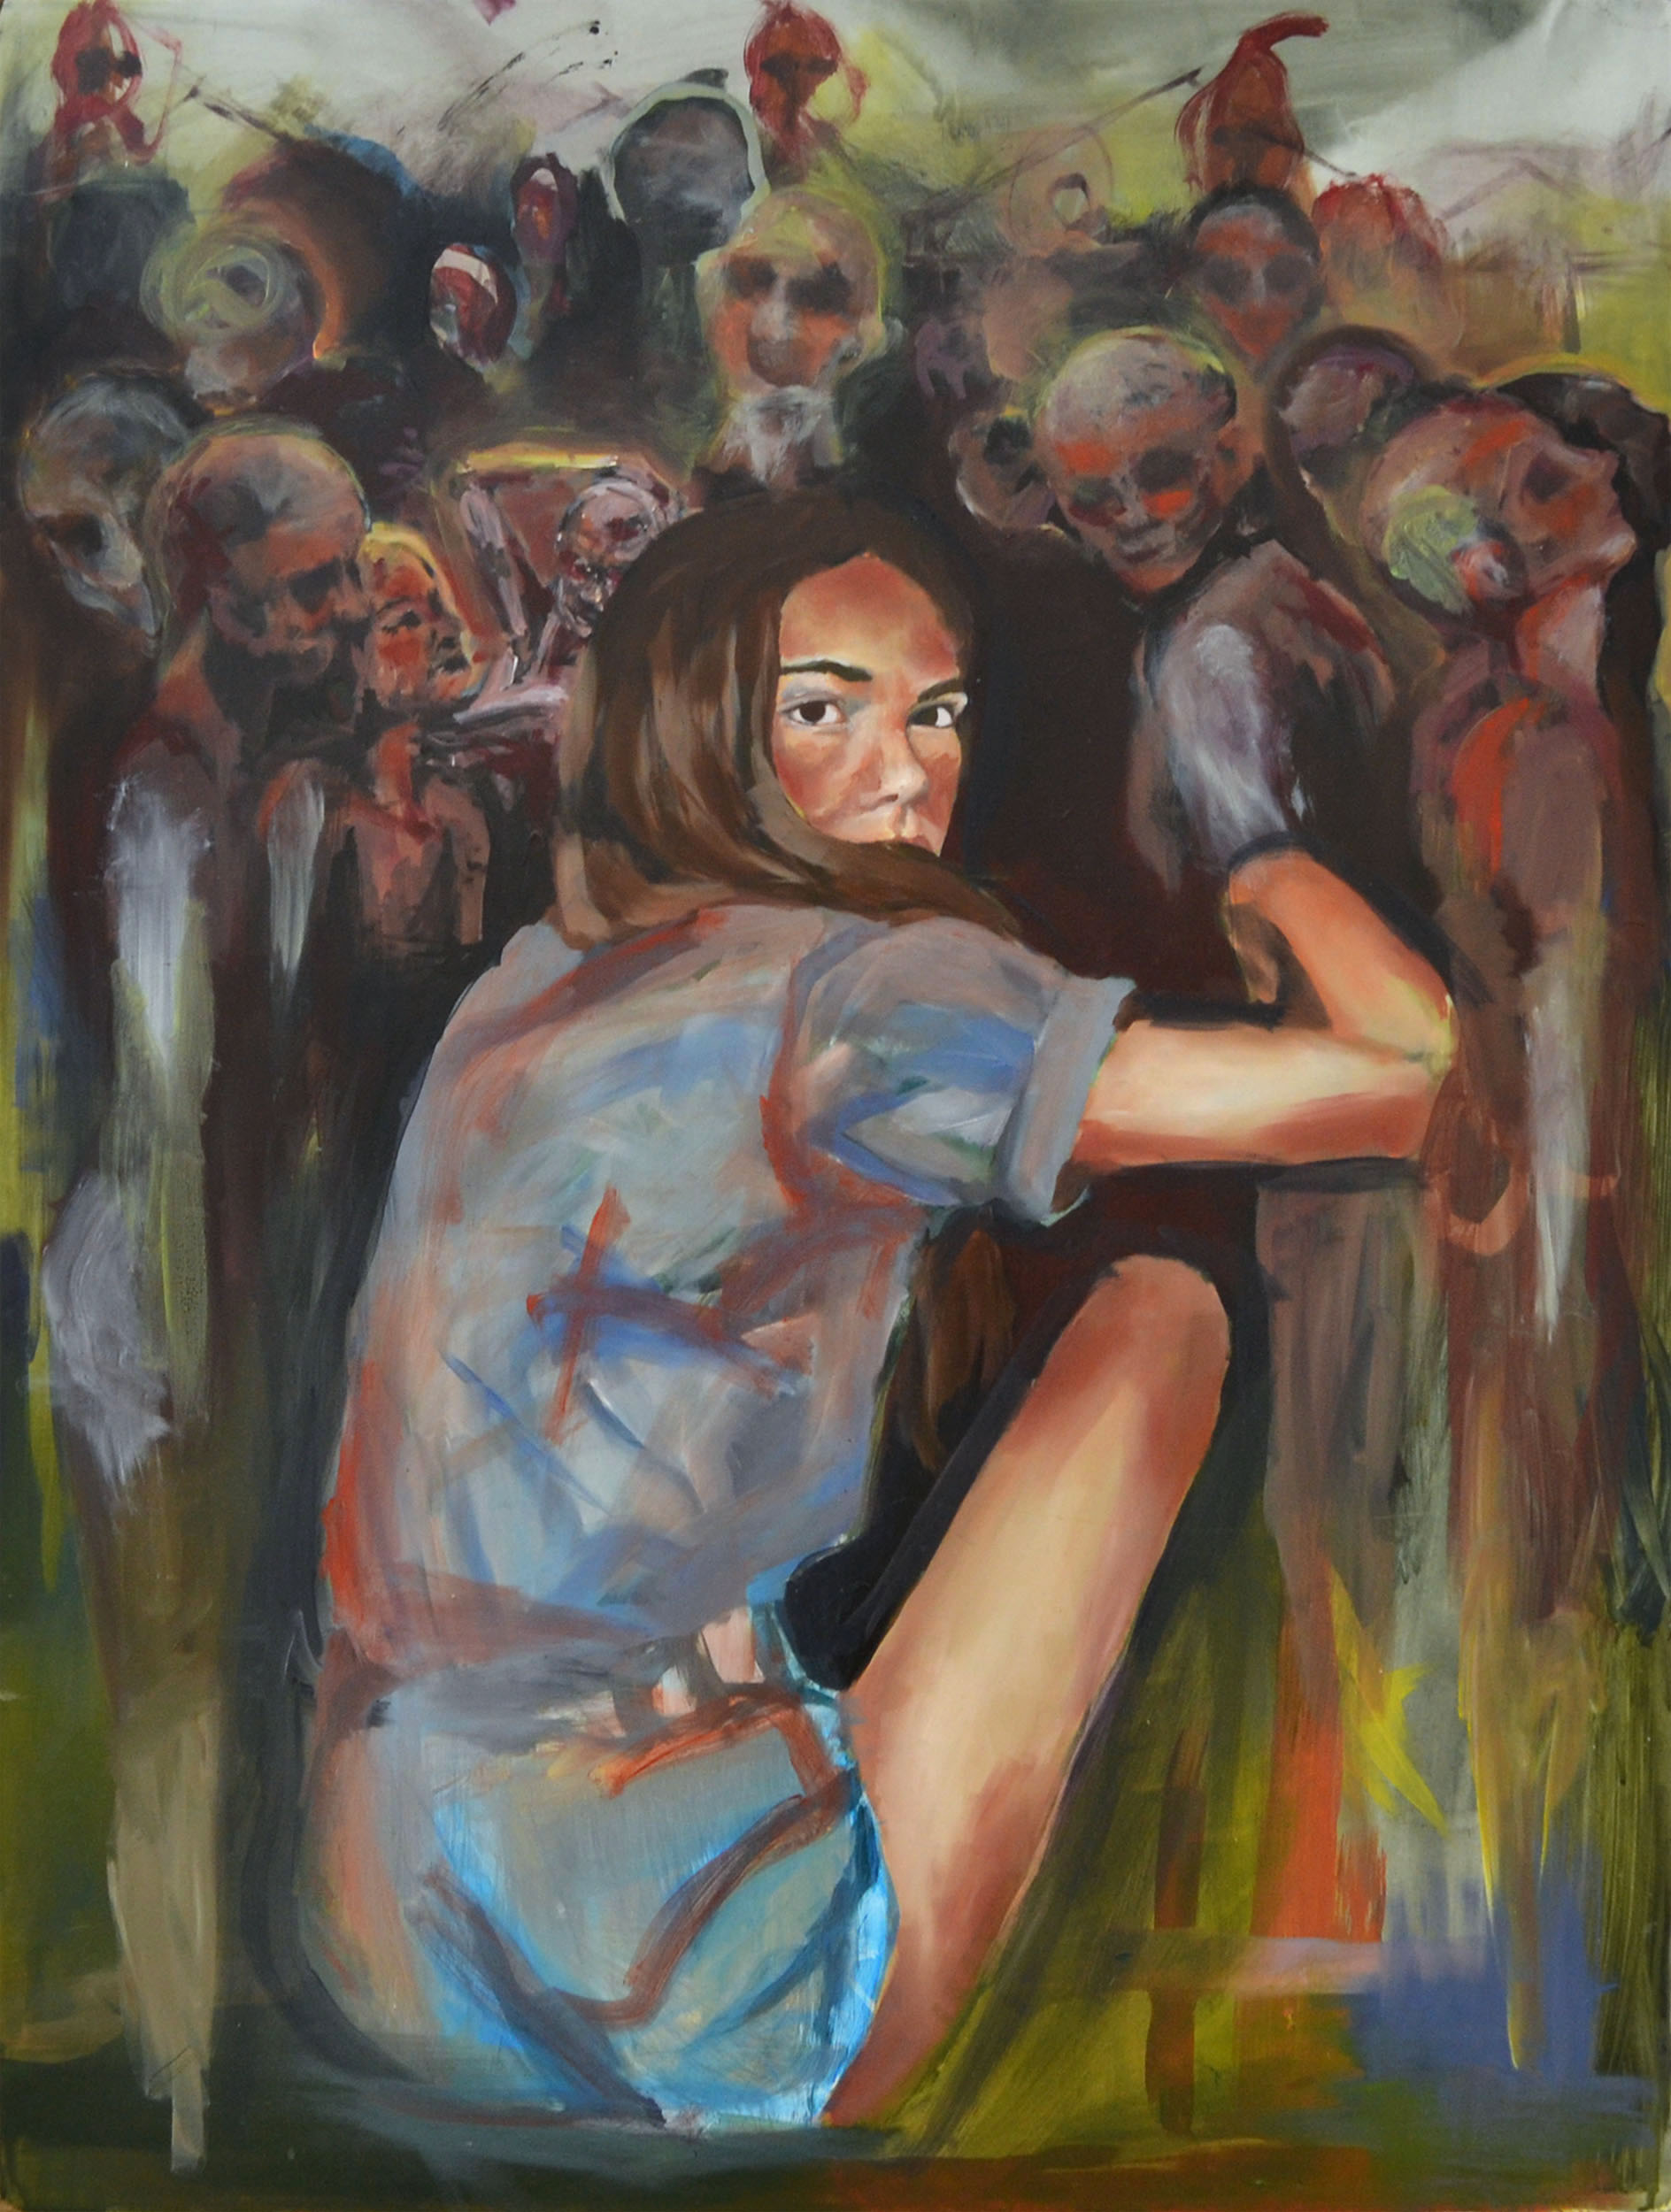 Painting of girl sitting with back turned facing a crowd